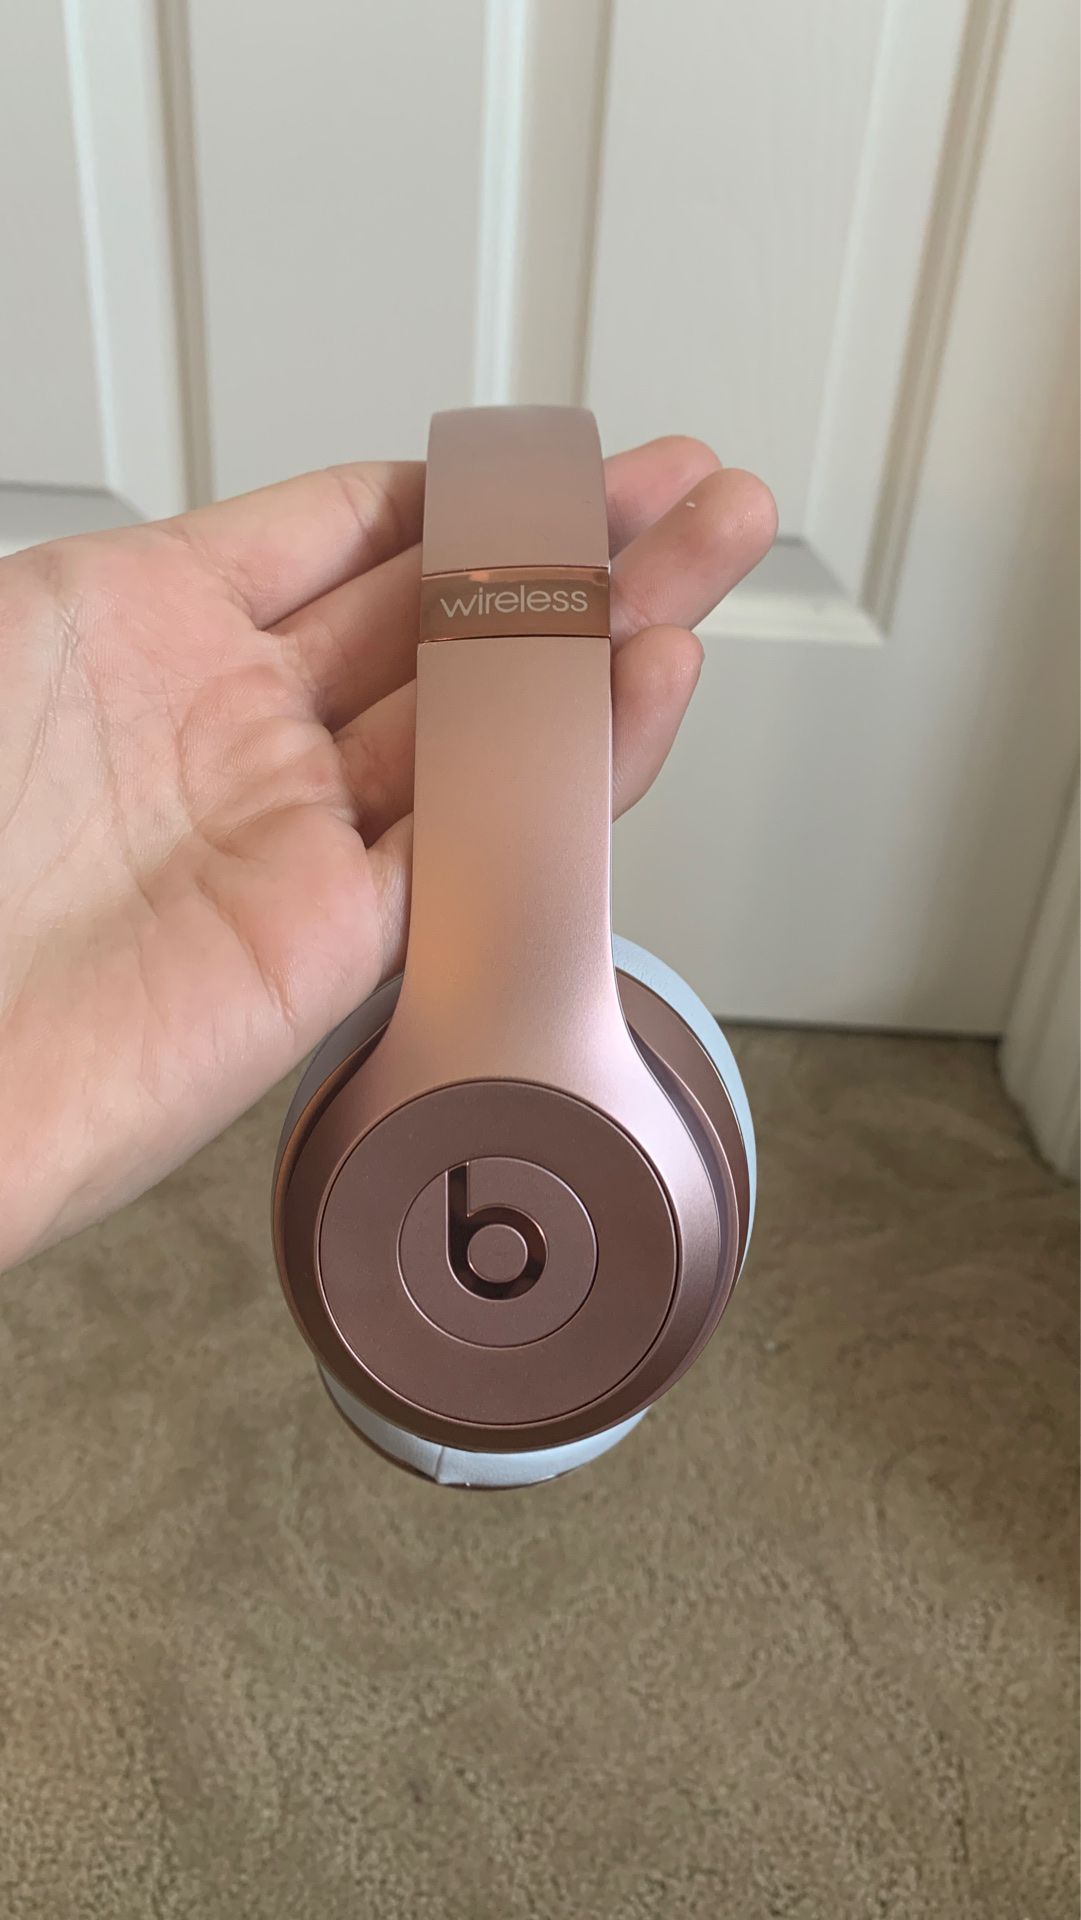 Beats by Dr. Dre - Beats Solo³ Wireless Headphones - Rose Gold